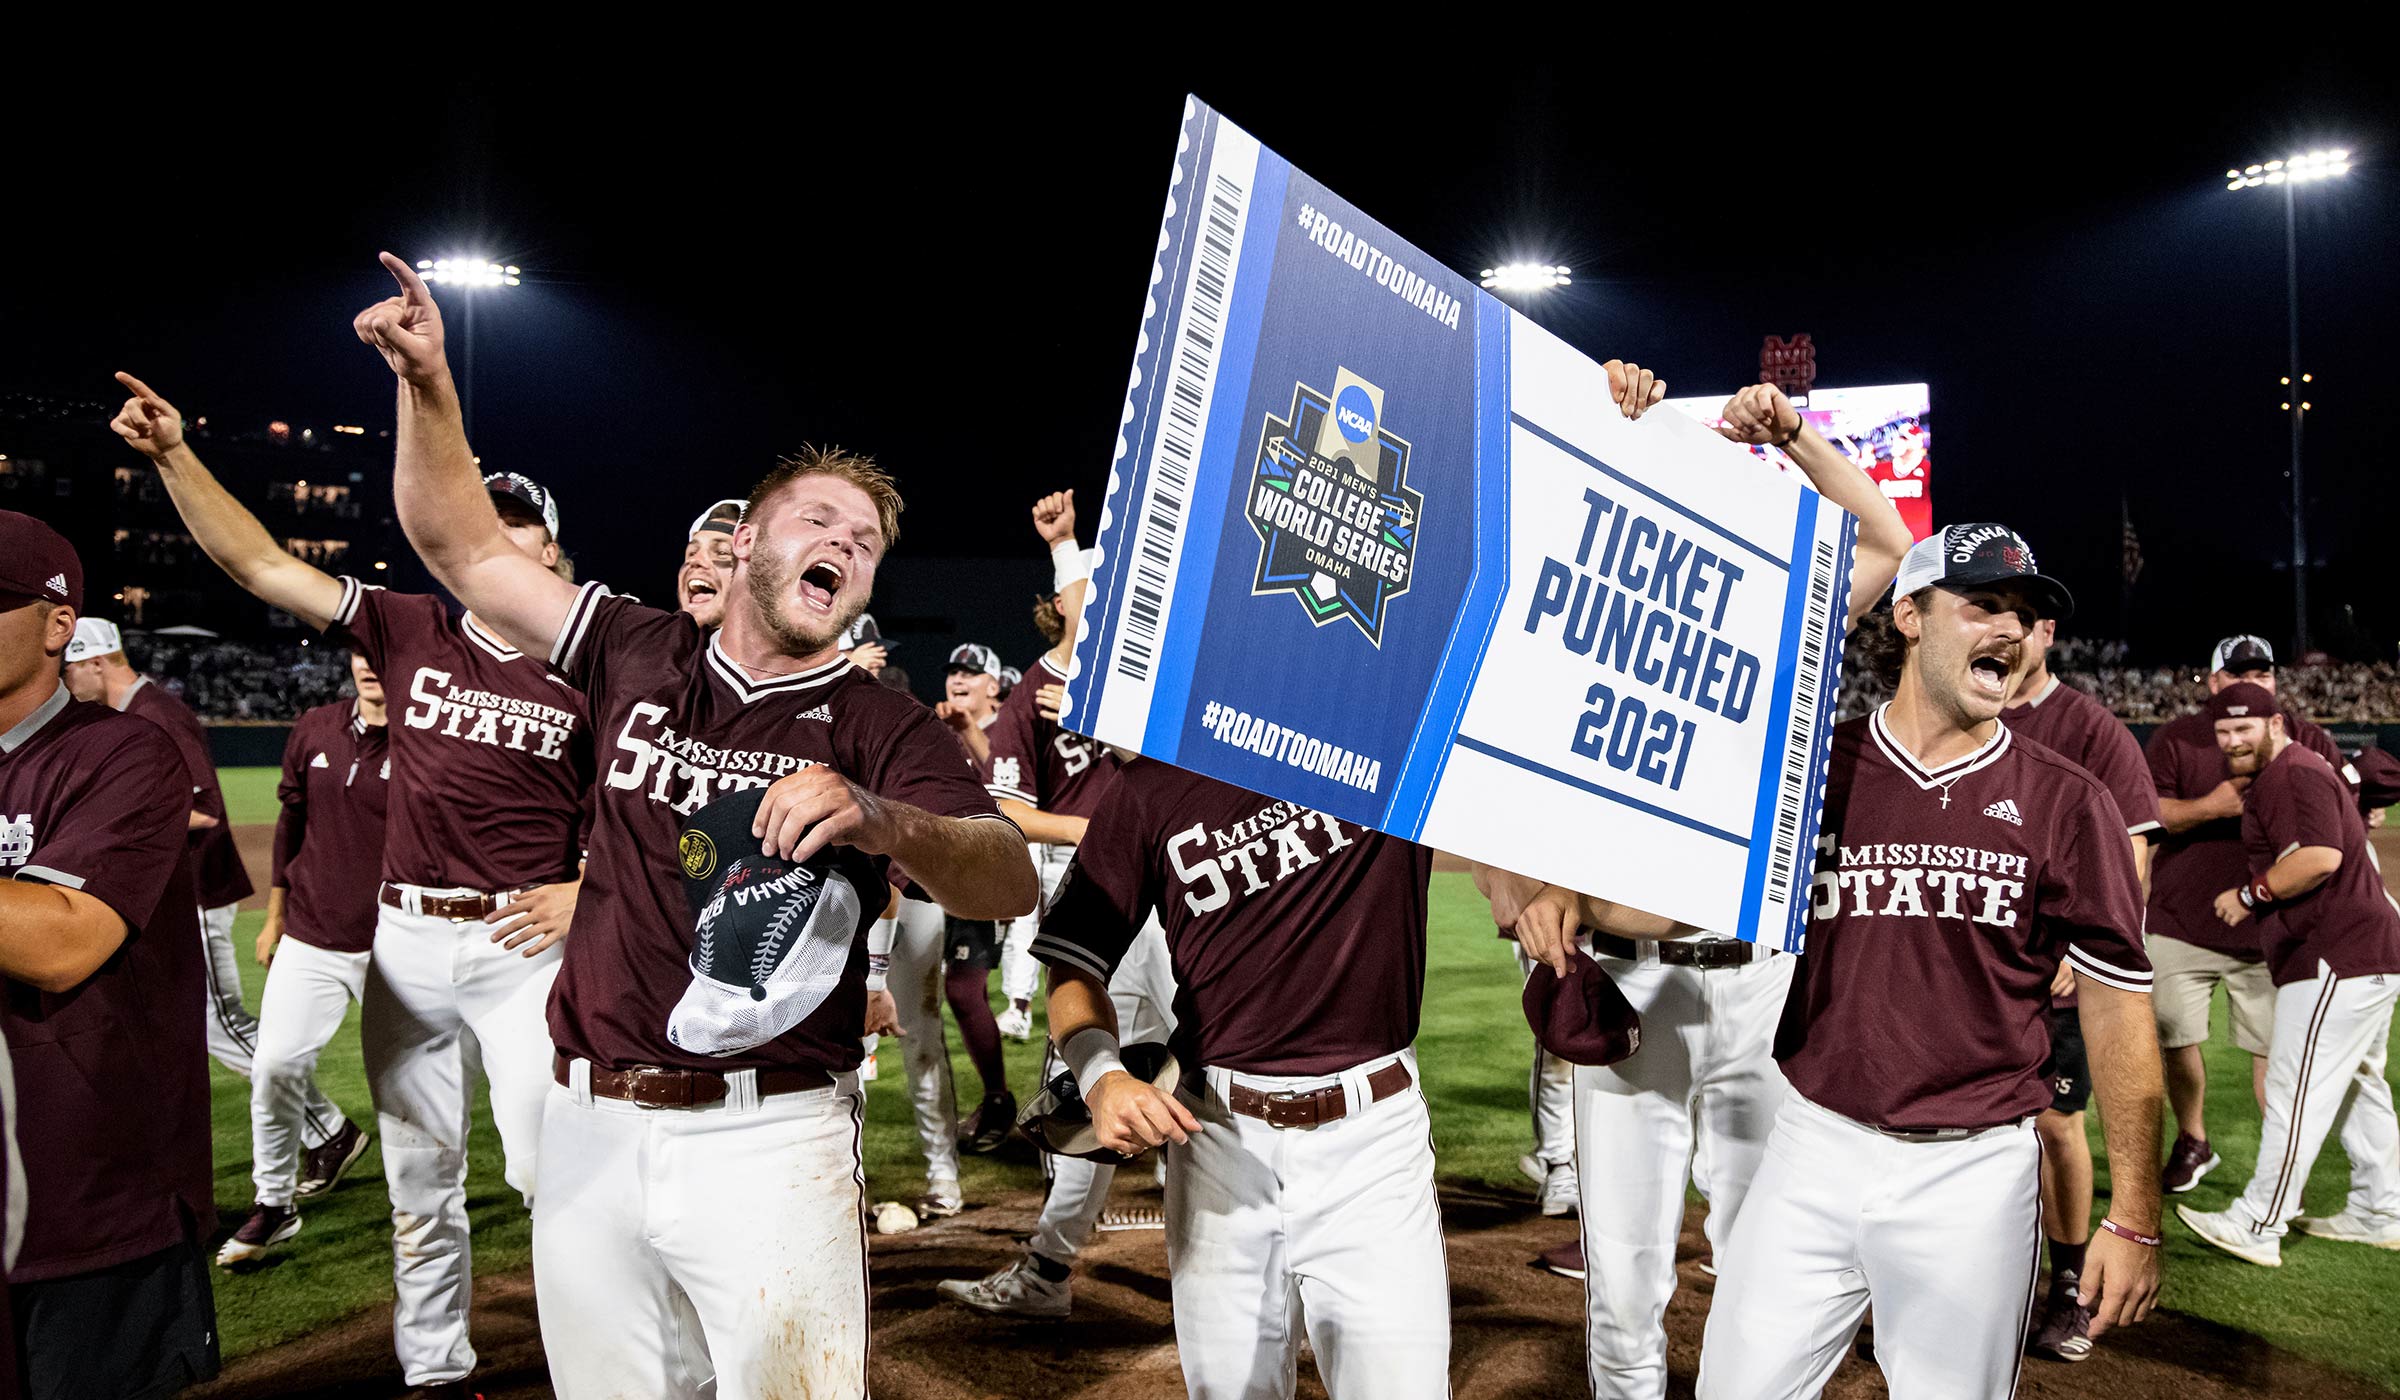 Baseball players in maroon jerseys and white pants celebrating on field with signs